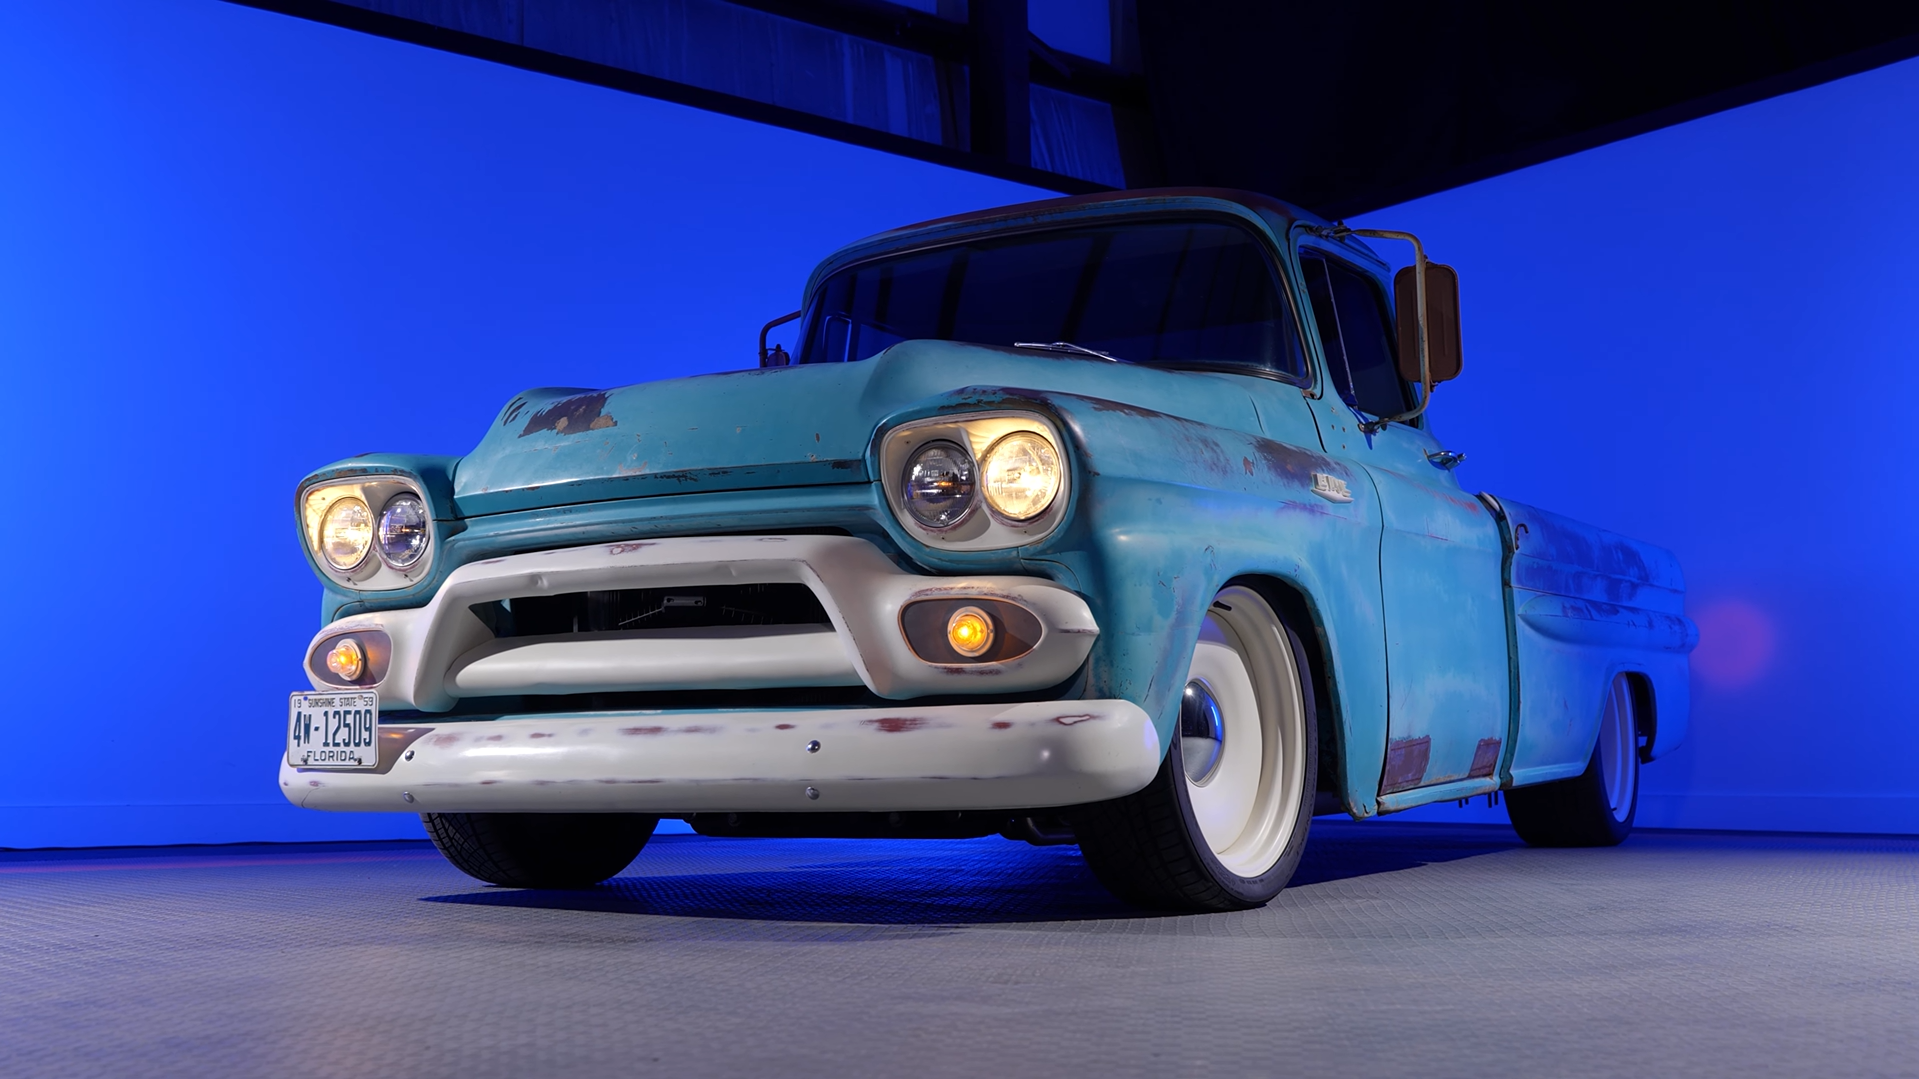 A vintage Chevrolet pickup is parked in an empty room.